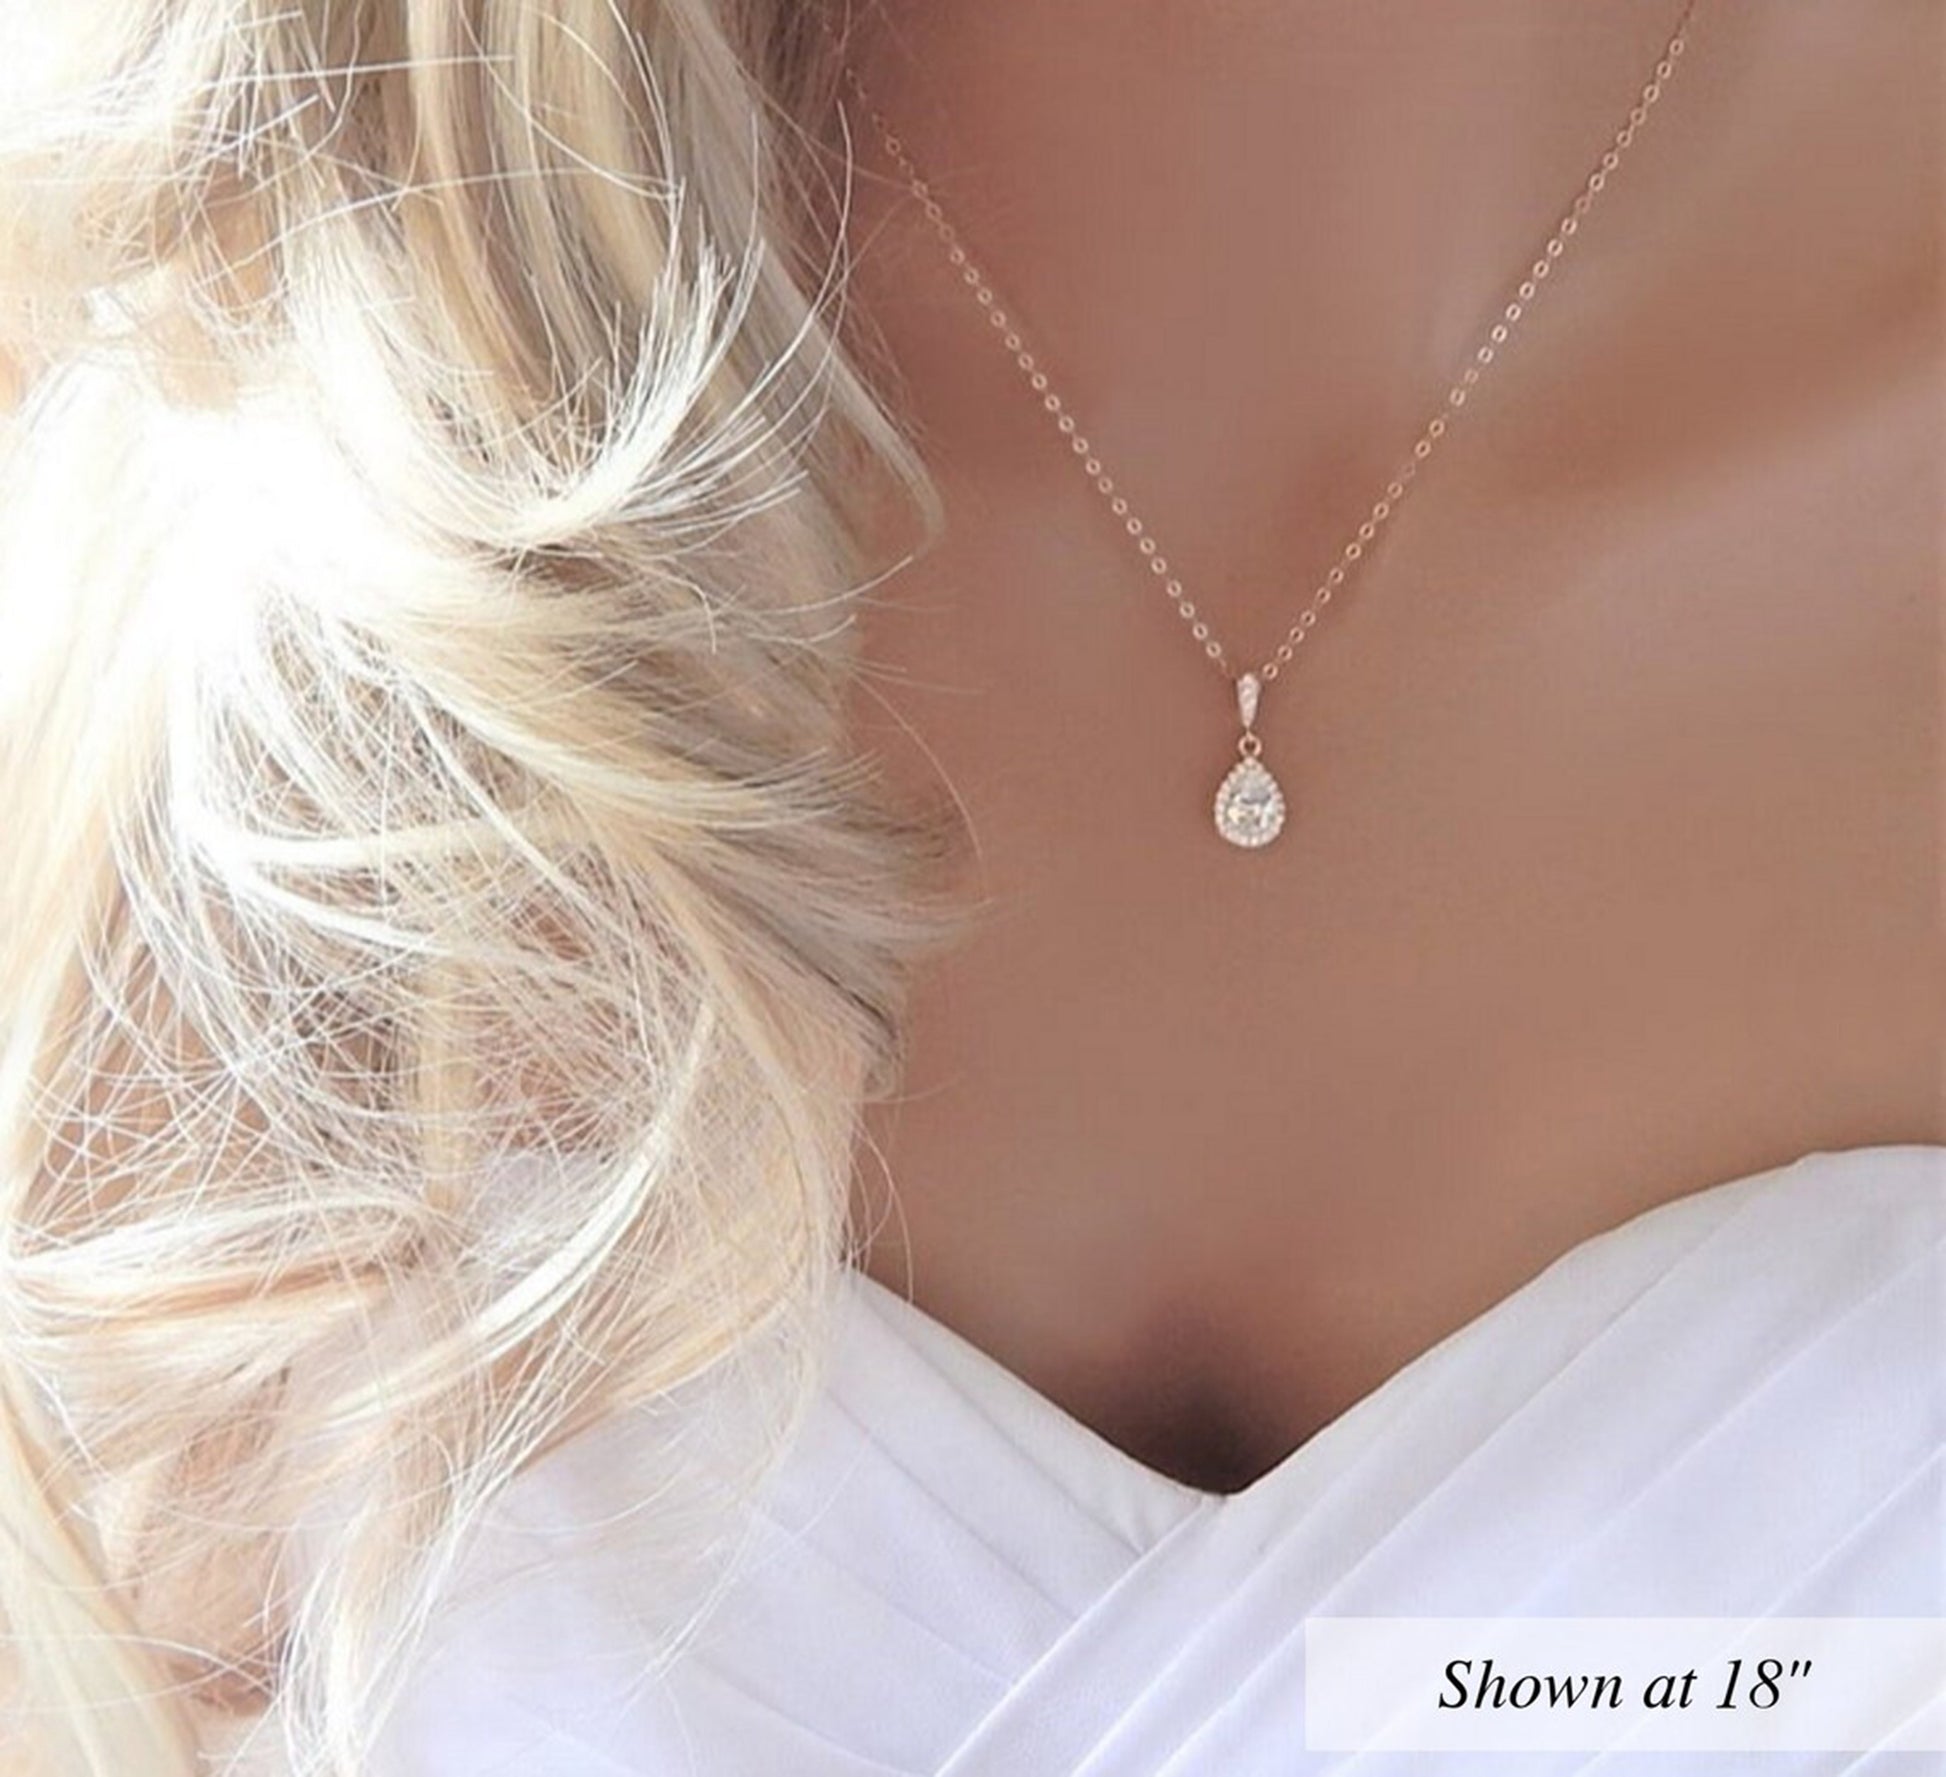 Gold wedding necklace with large pear shaped CZ diamond pendant on a bridal mannequin.